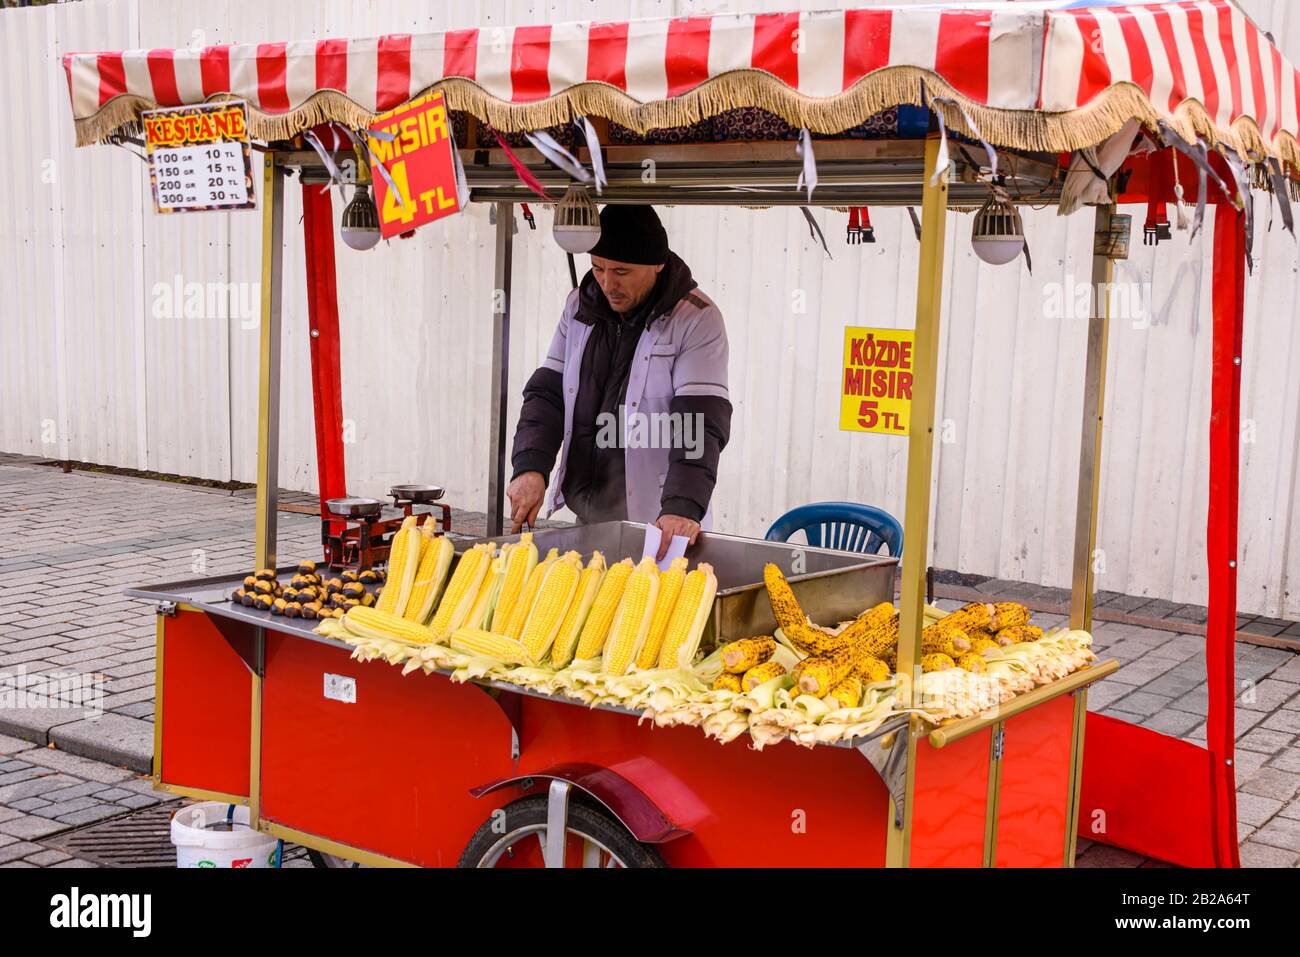 Roasted sweetcorn on sale at a traditional street cart, Istanbul, Turkey Stock Photo